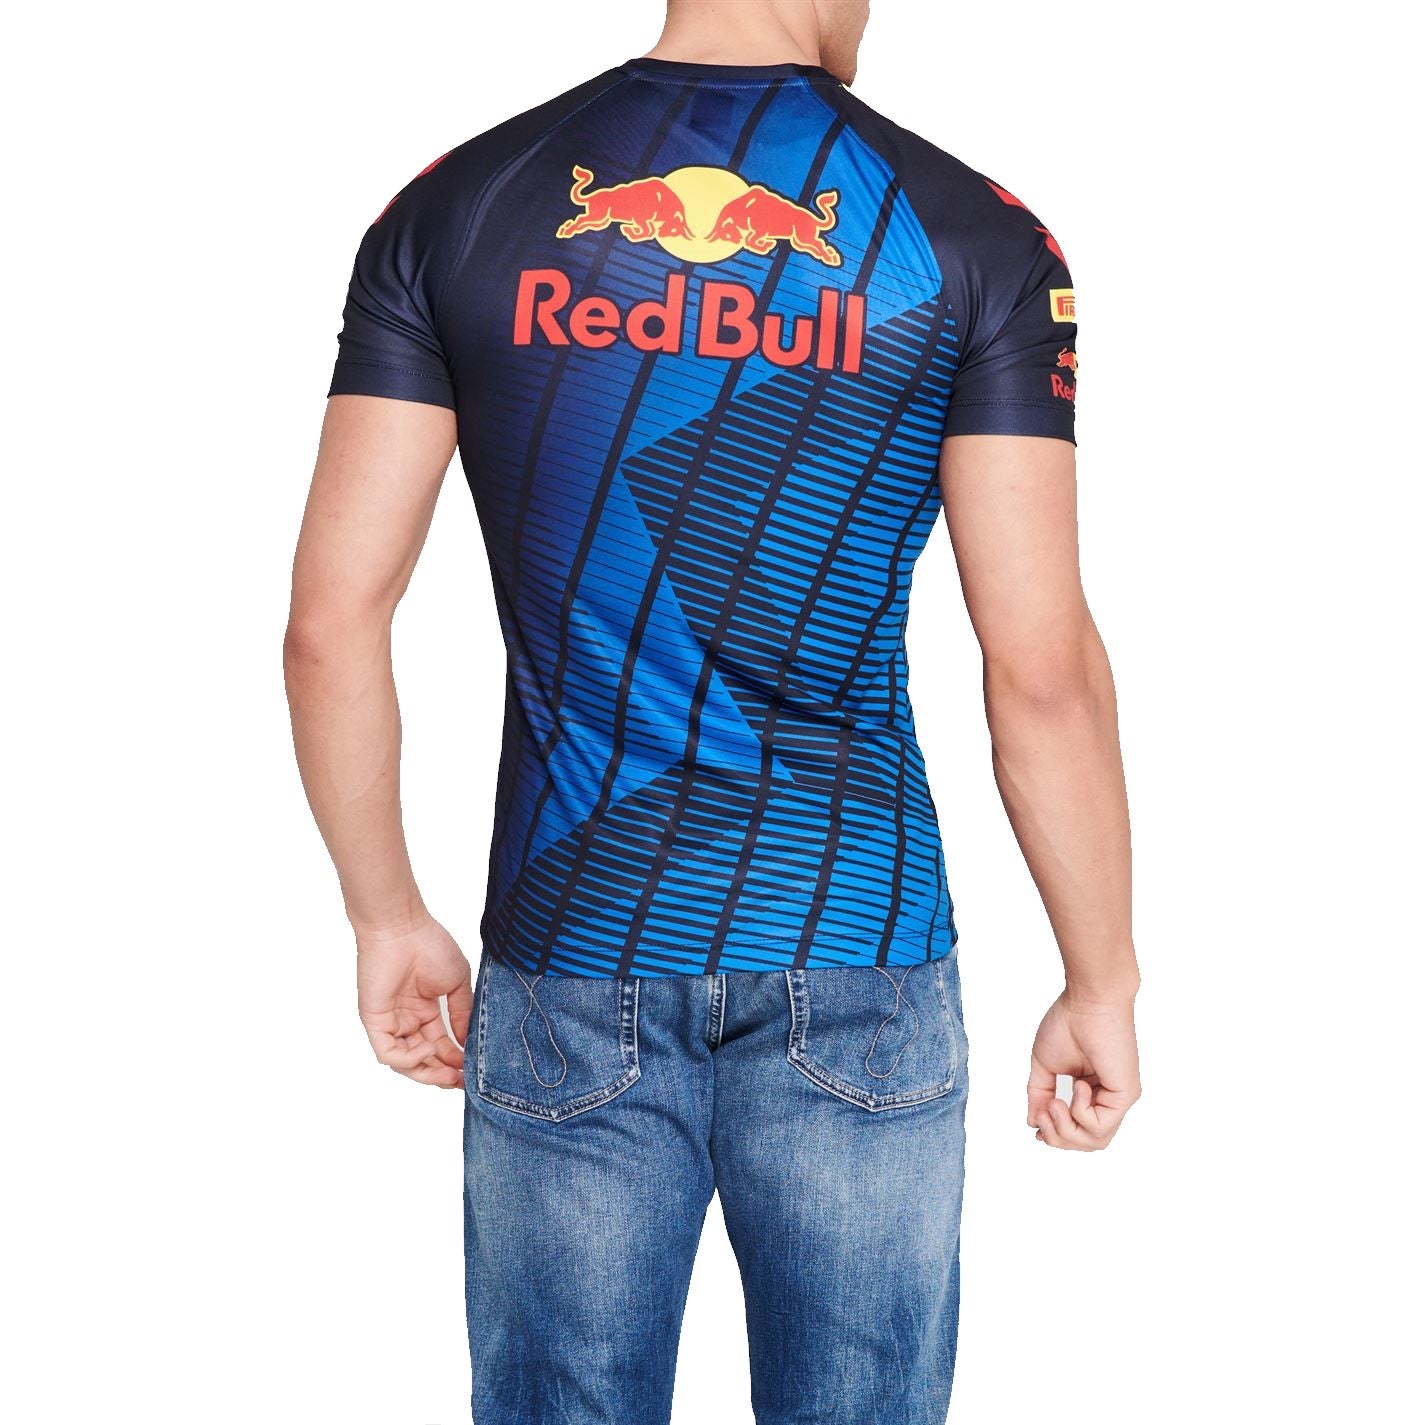 Oracle Red Bull Racing E-sports Driver T-shirt Men Navy Blue – FANABOX™